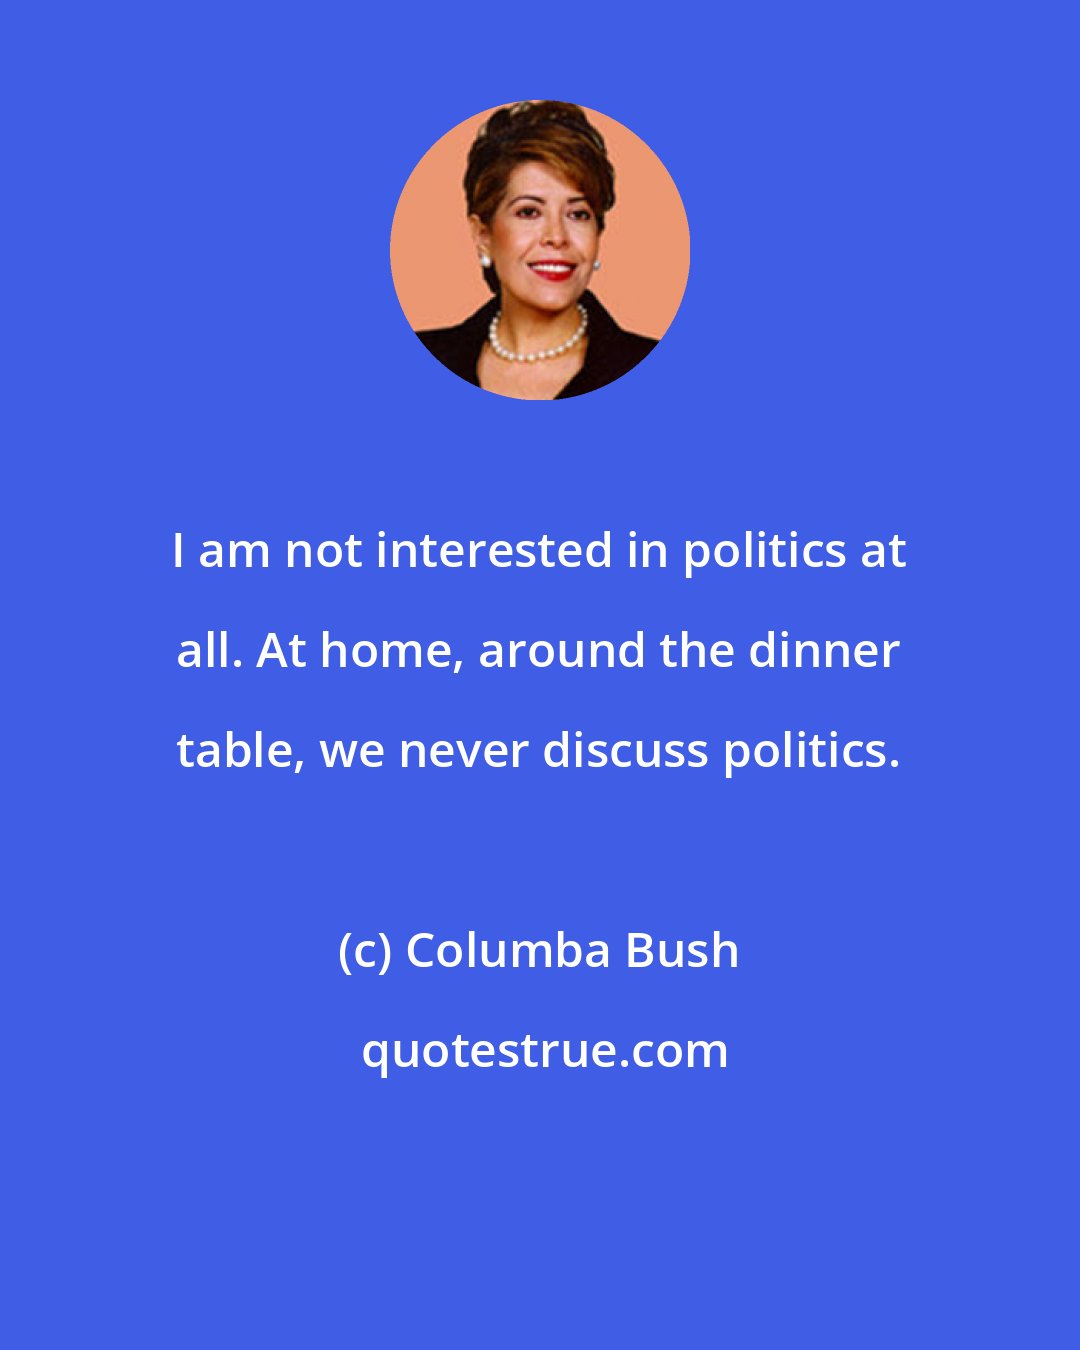 Columba Bush: I am not interested in politics at all. At home, around the dinner table, we never discuss politics.